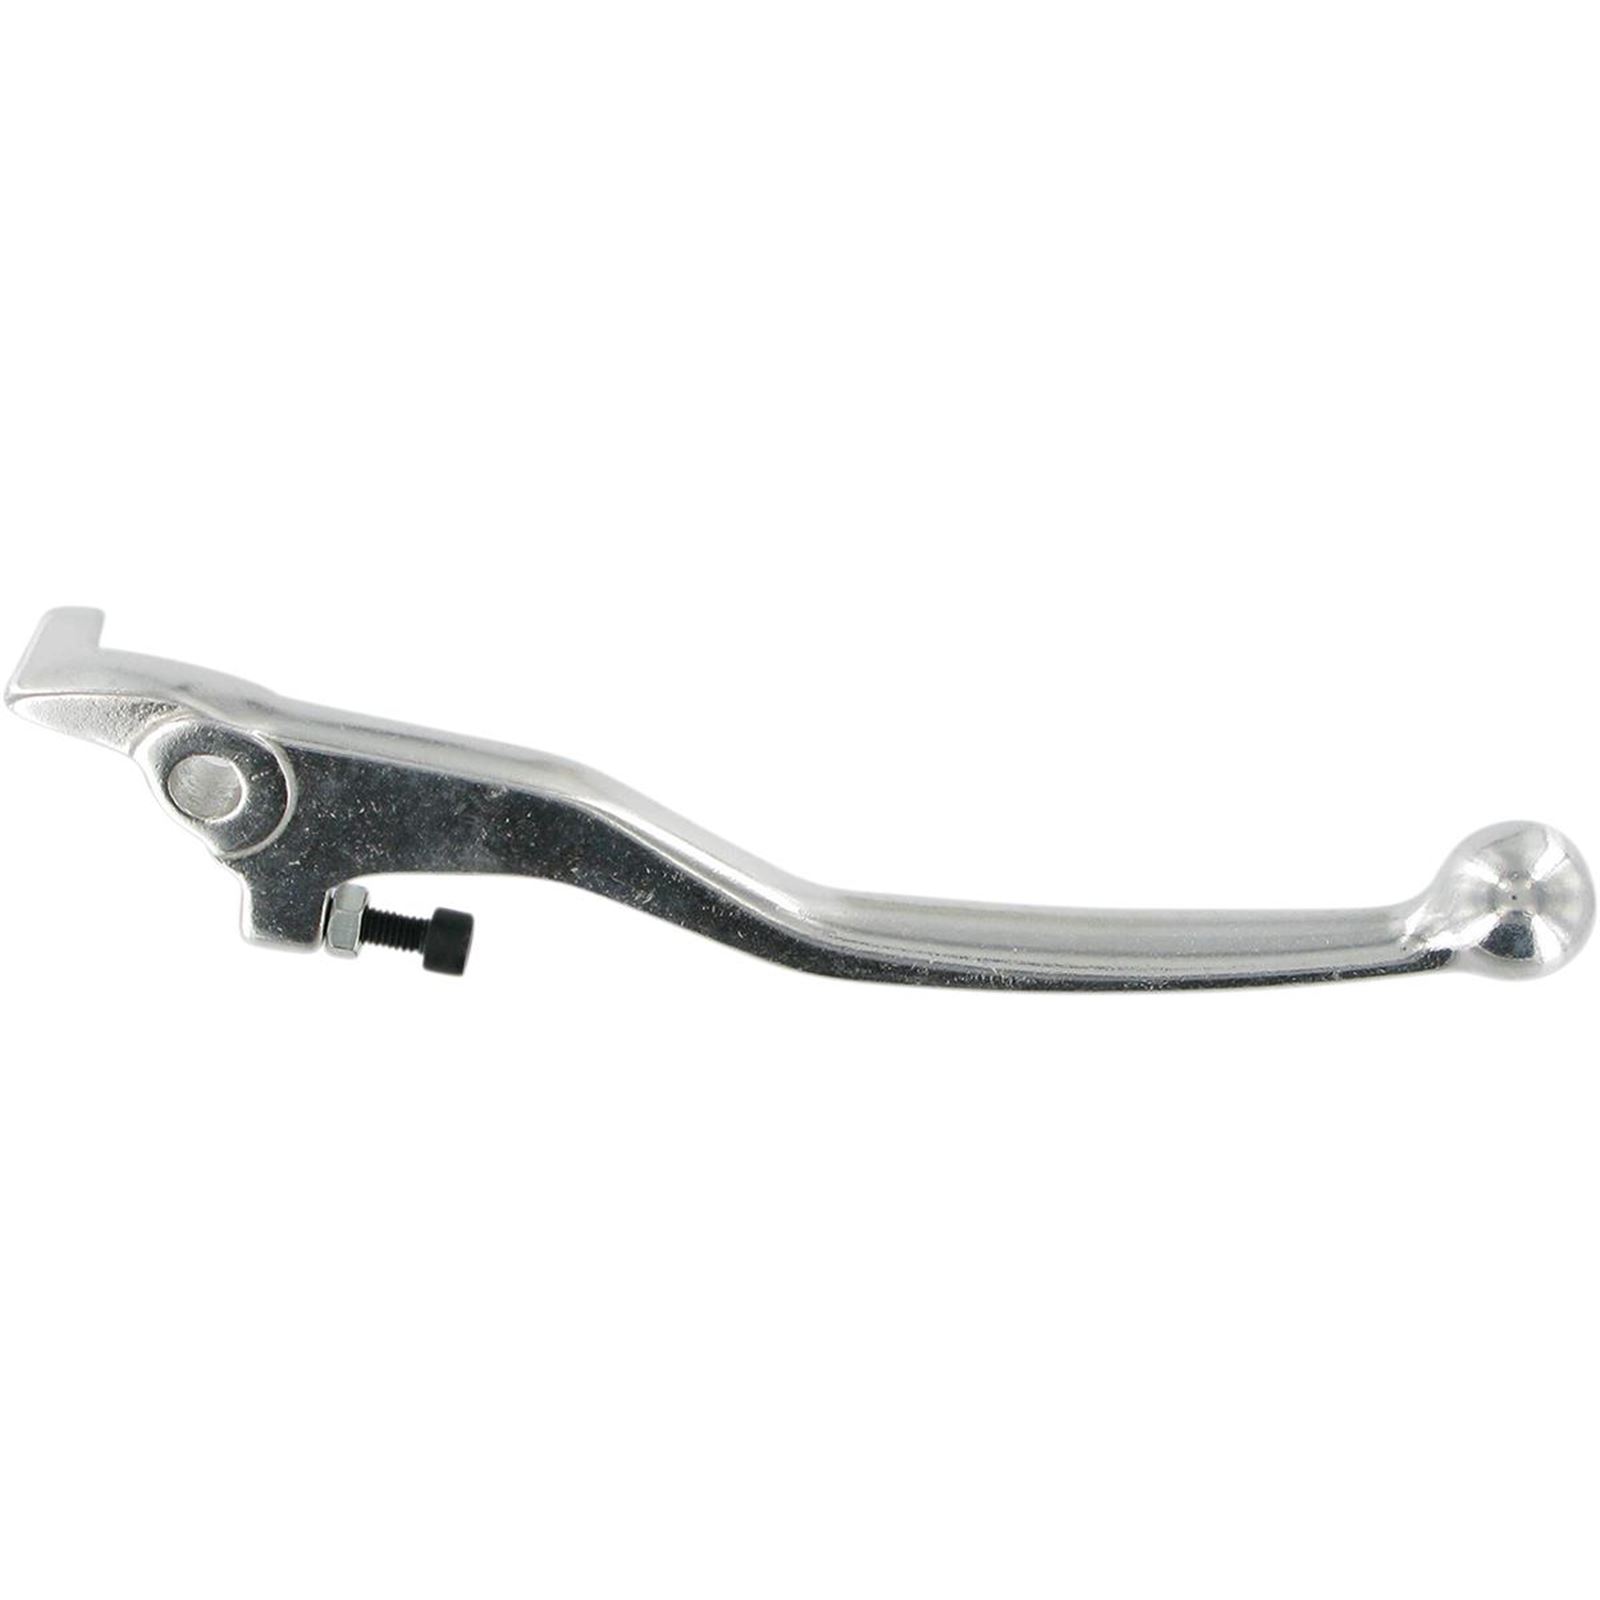 Parts Unlimited Lever - Right-Hand for Suzuki